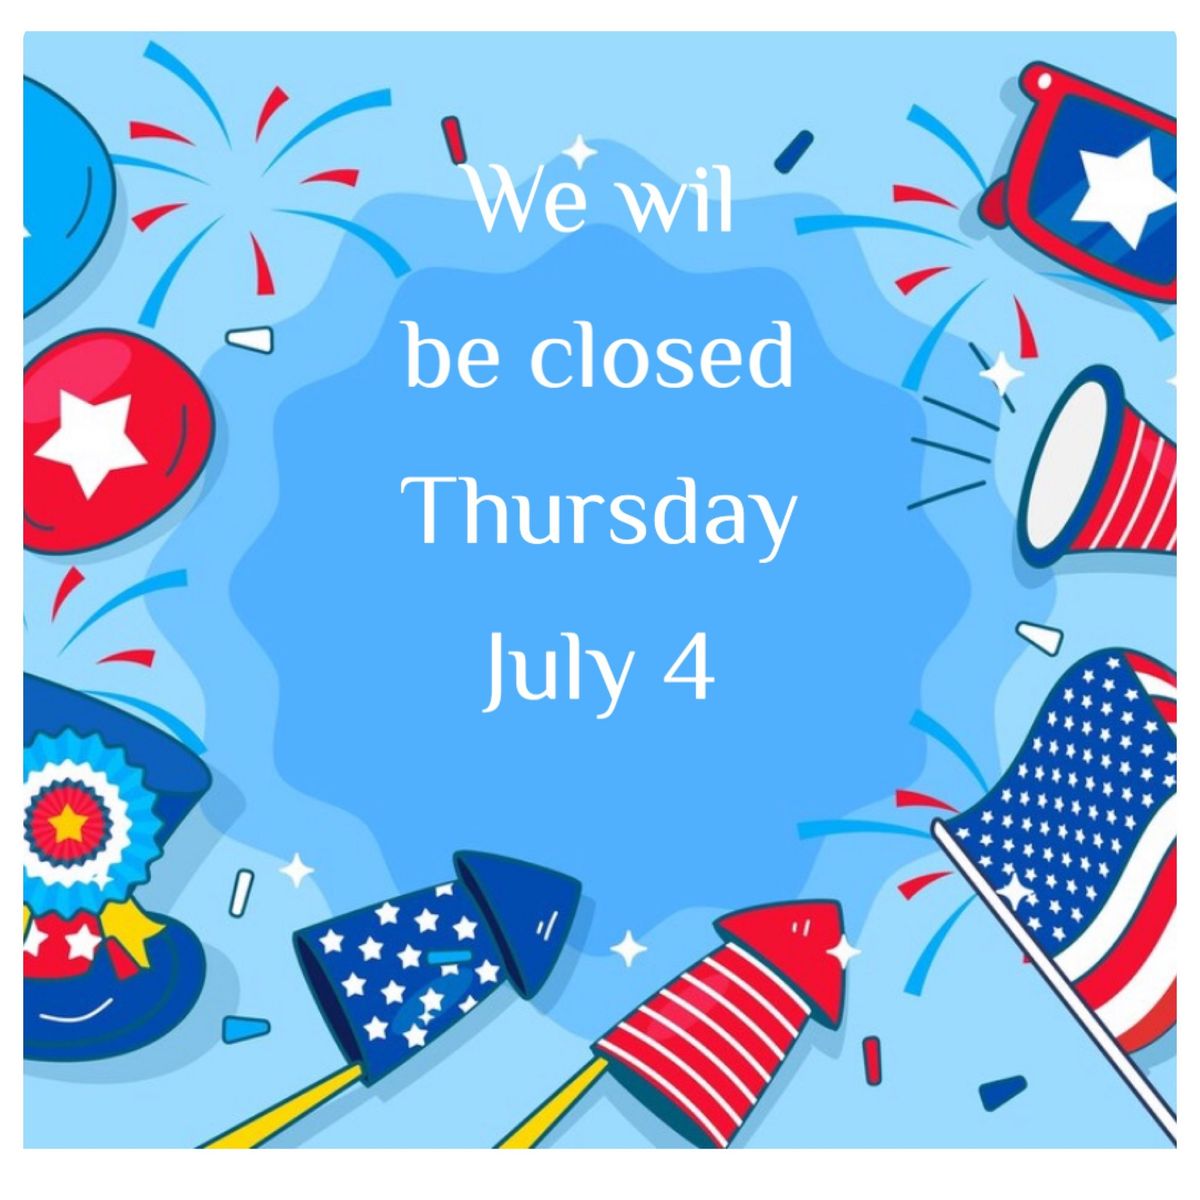 \ud83c\udf86\ud83c\udf89\ud83c\udfb8\ud83d\udda4\ud83c\udf08THURSDAY July 4th  CLOSED TODAY